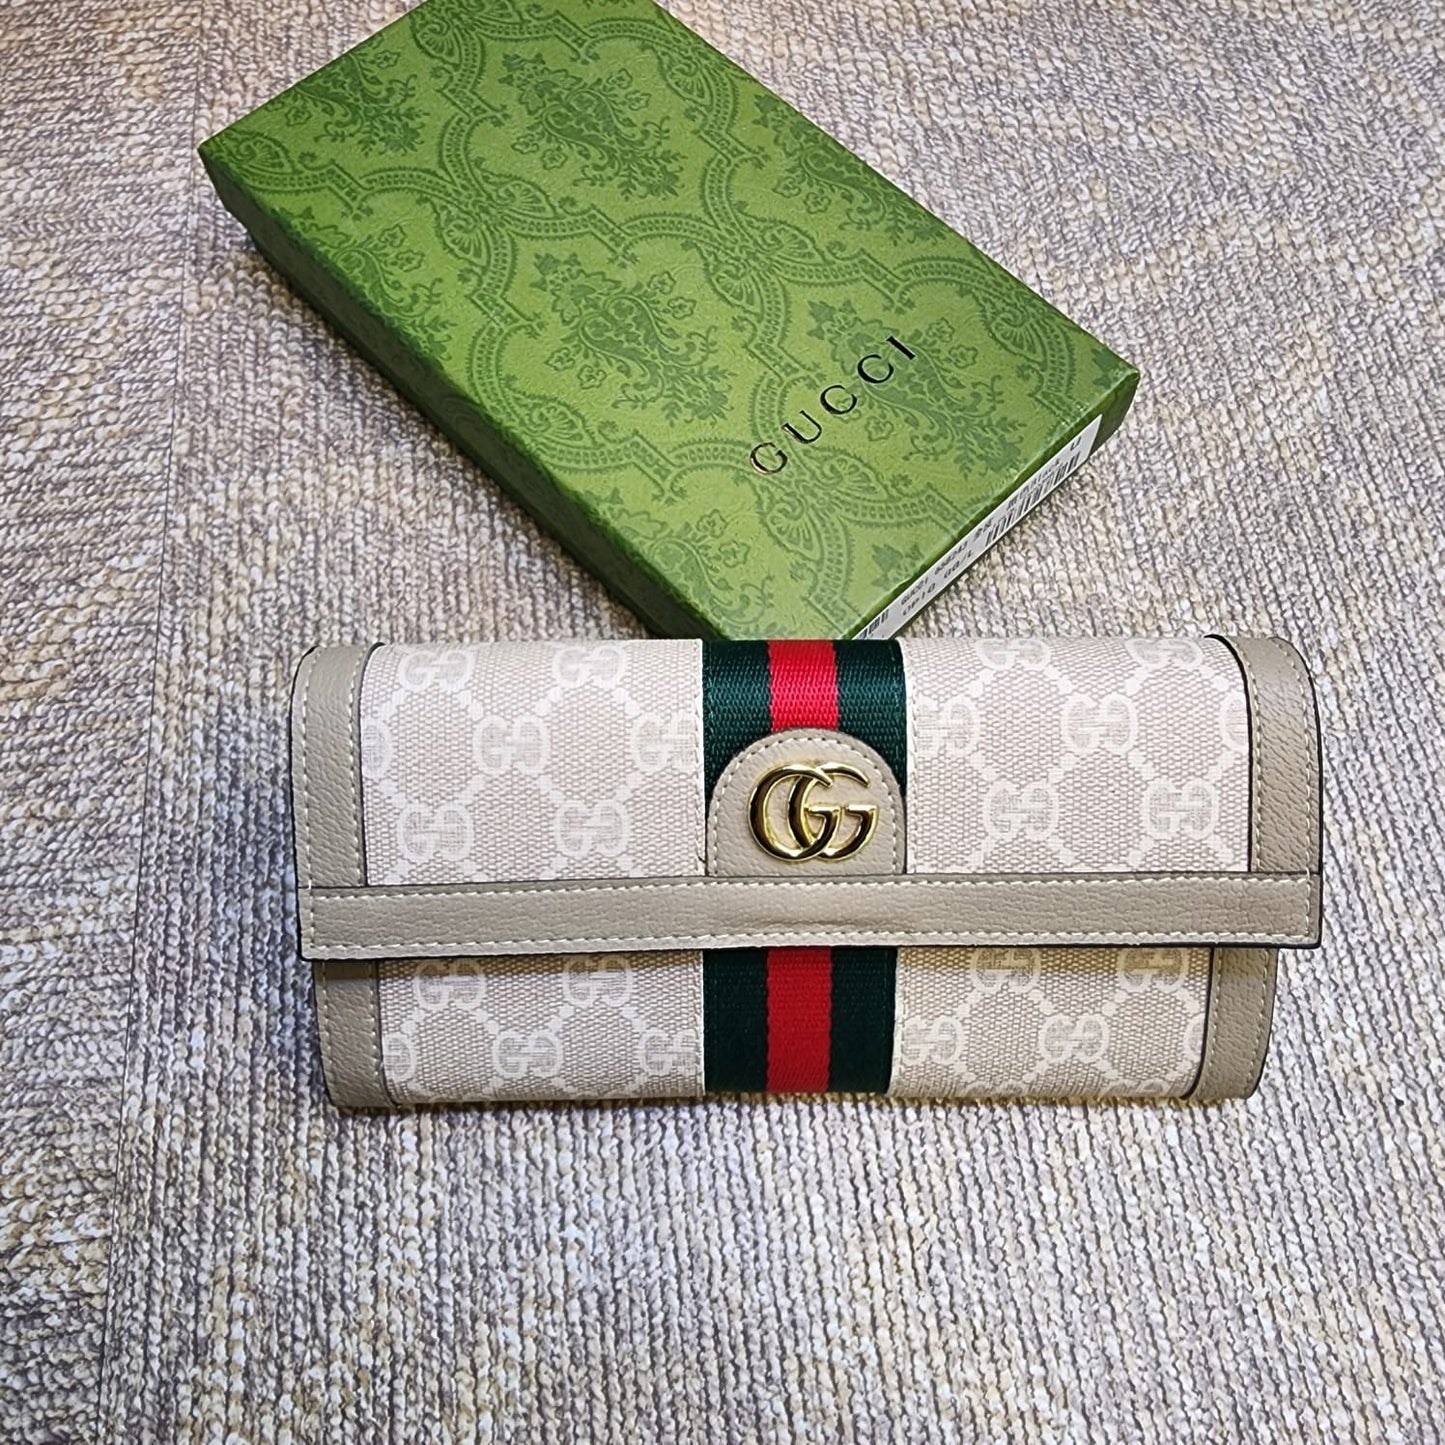 Gucci Wallet Style #2